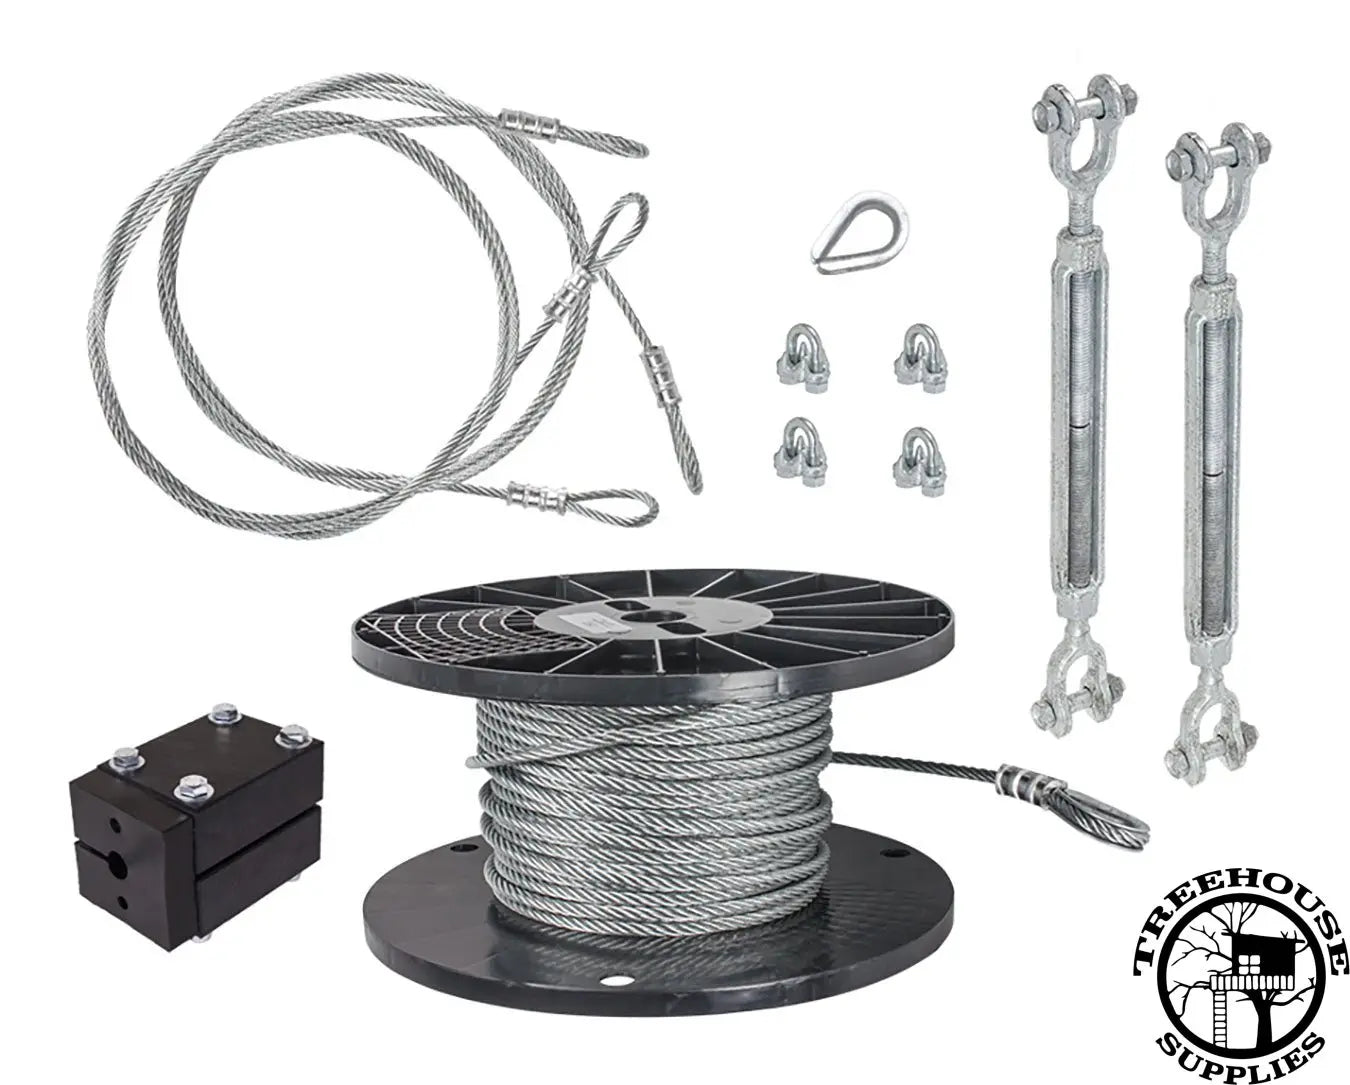 DIY ZIPLINE CABLE KIT - 100FT- 500FT - Treehouse Supplies